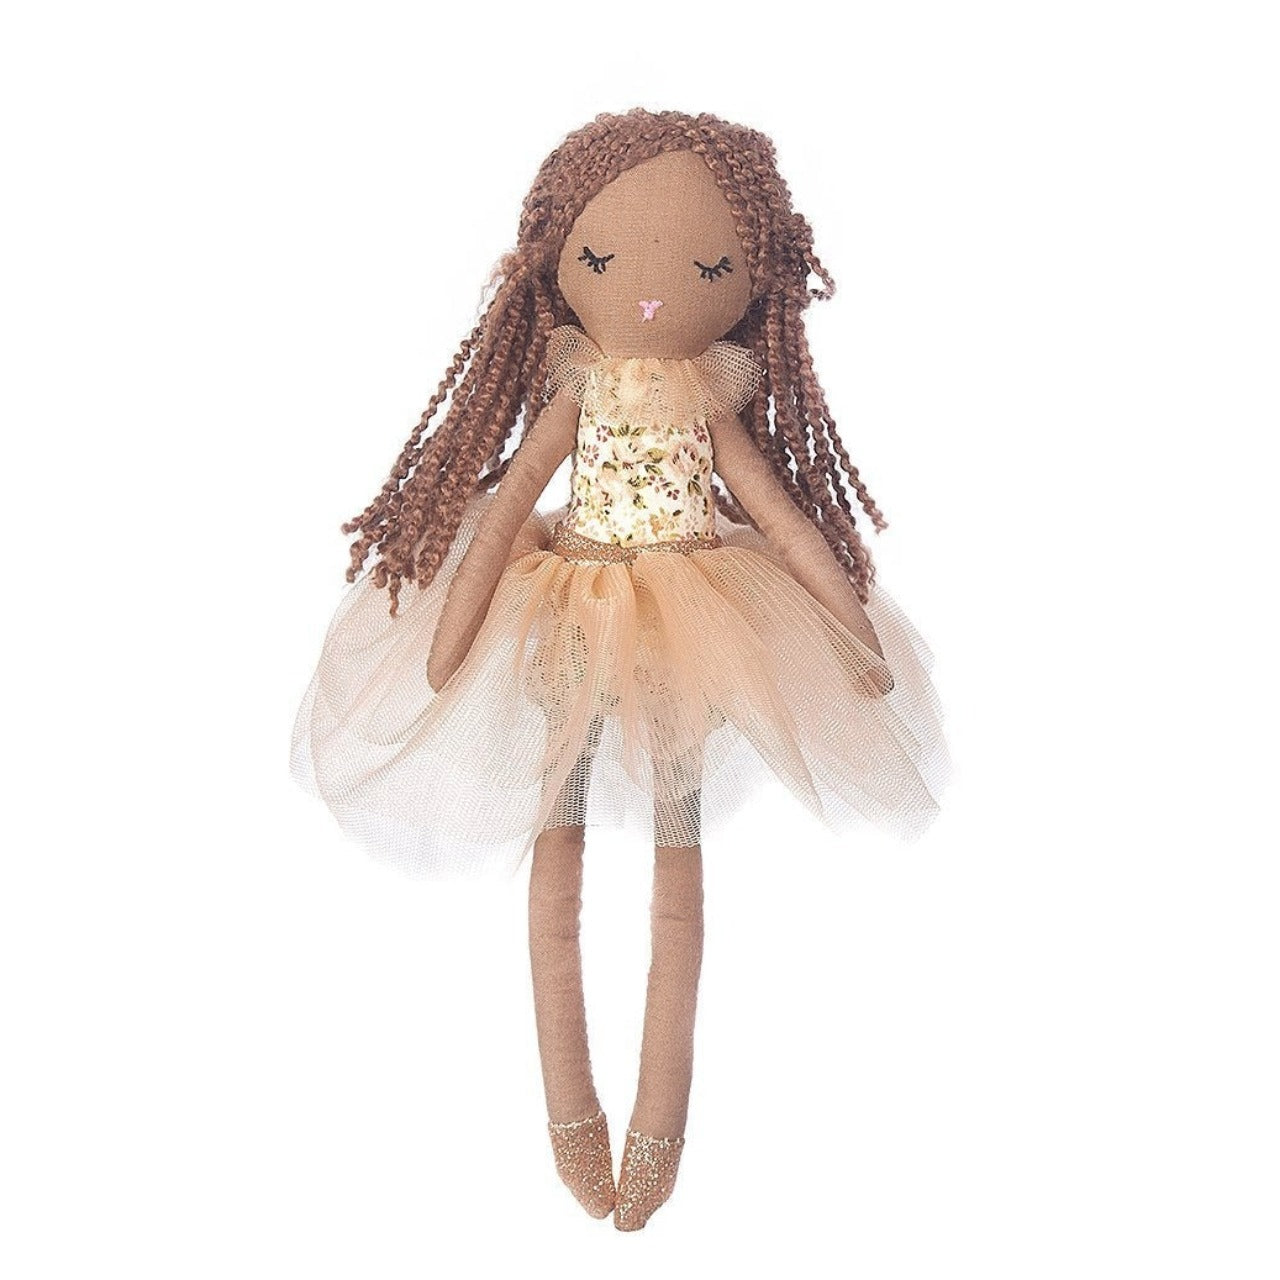 'Cookie' - biscuit scented doll Small or Large